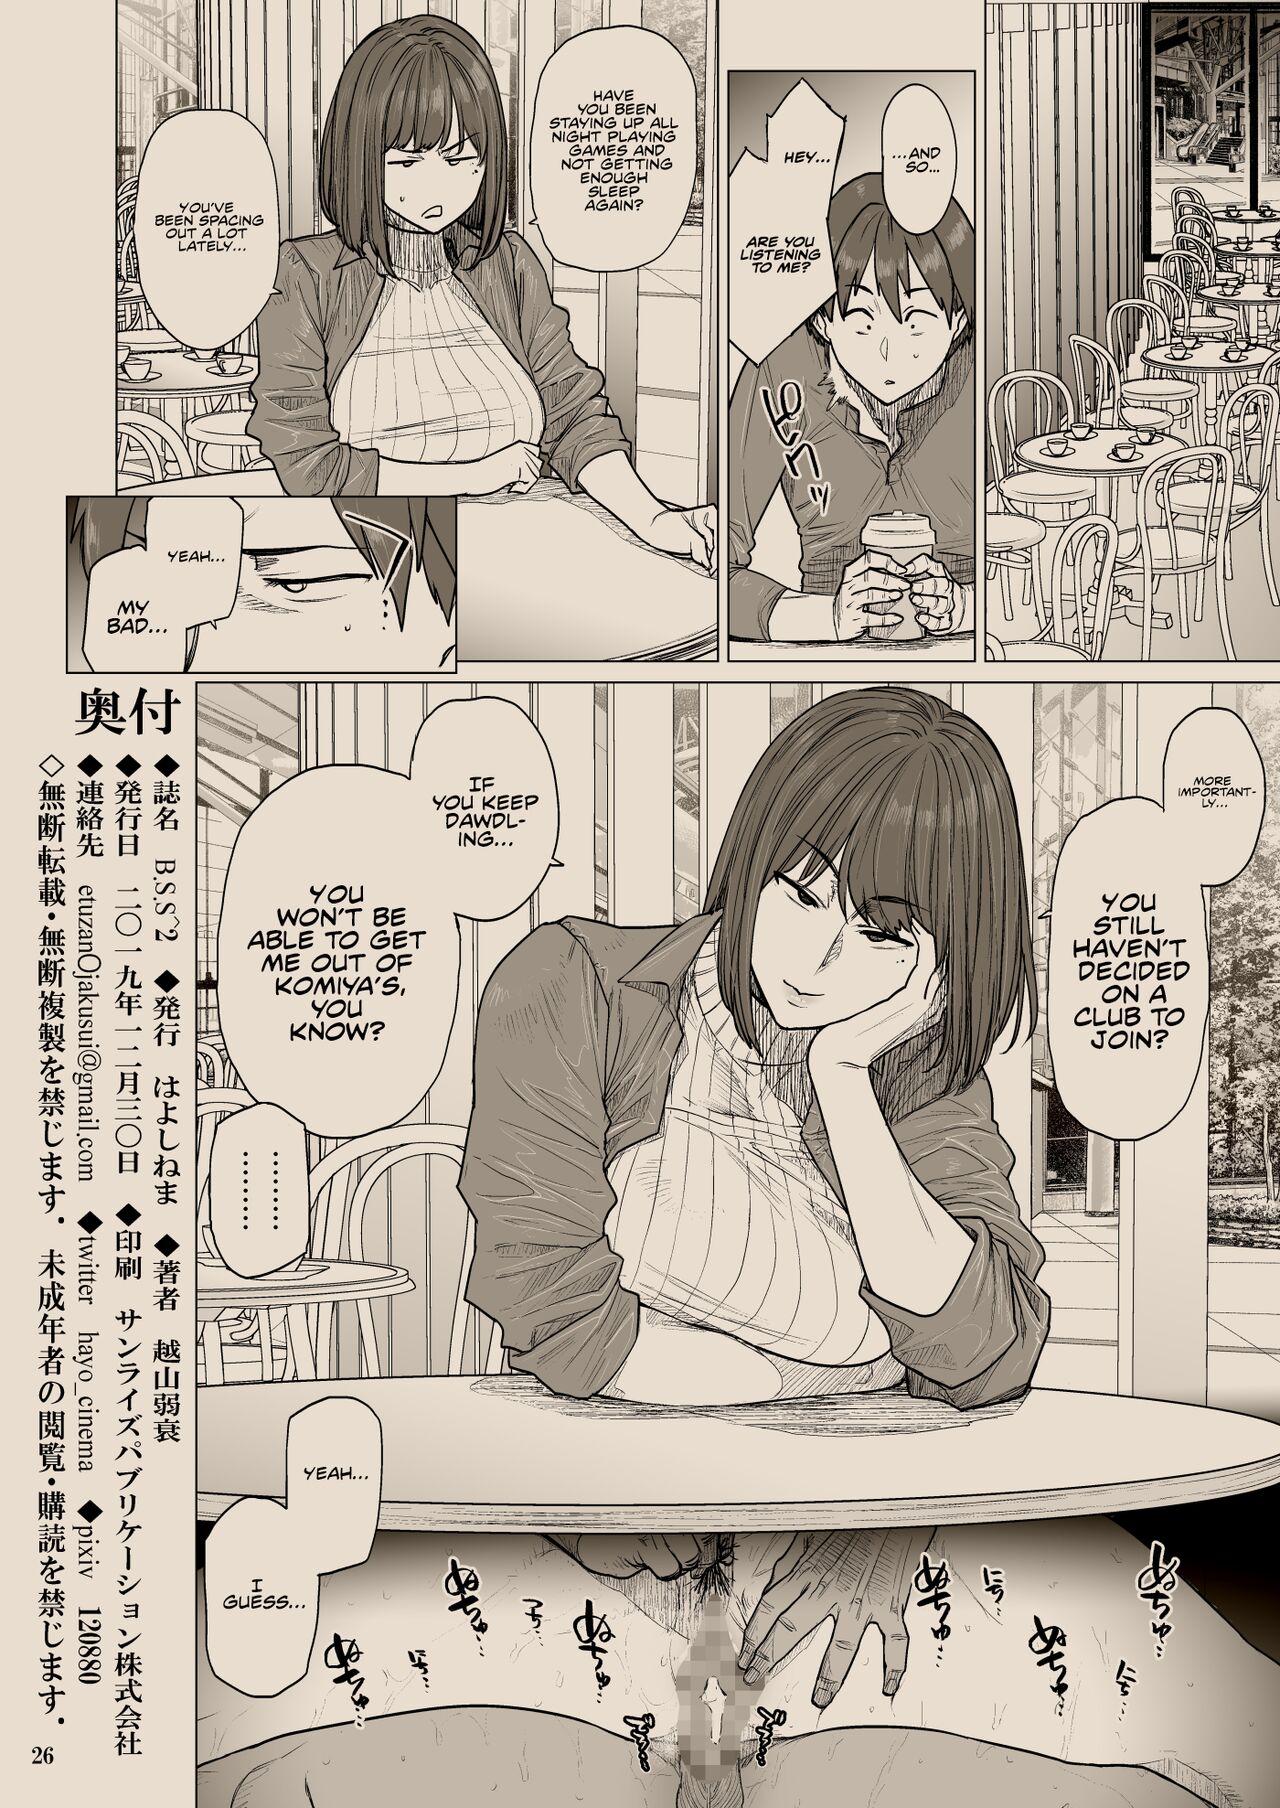 Blows B.S.S.² - My Smart, Beautiful Childhood Friend That I Loved First Became an Assistant of an Upperclassman’s Club and He Did Whatever He Pleased to Her - Original Amateur Cum - Page 25